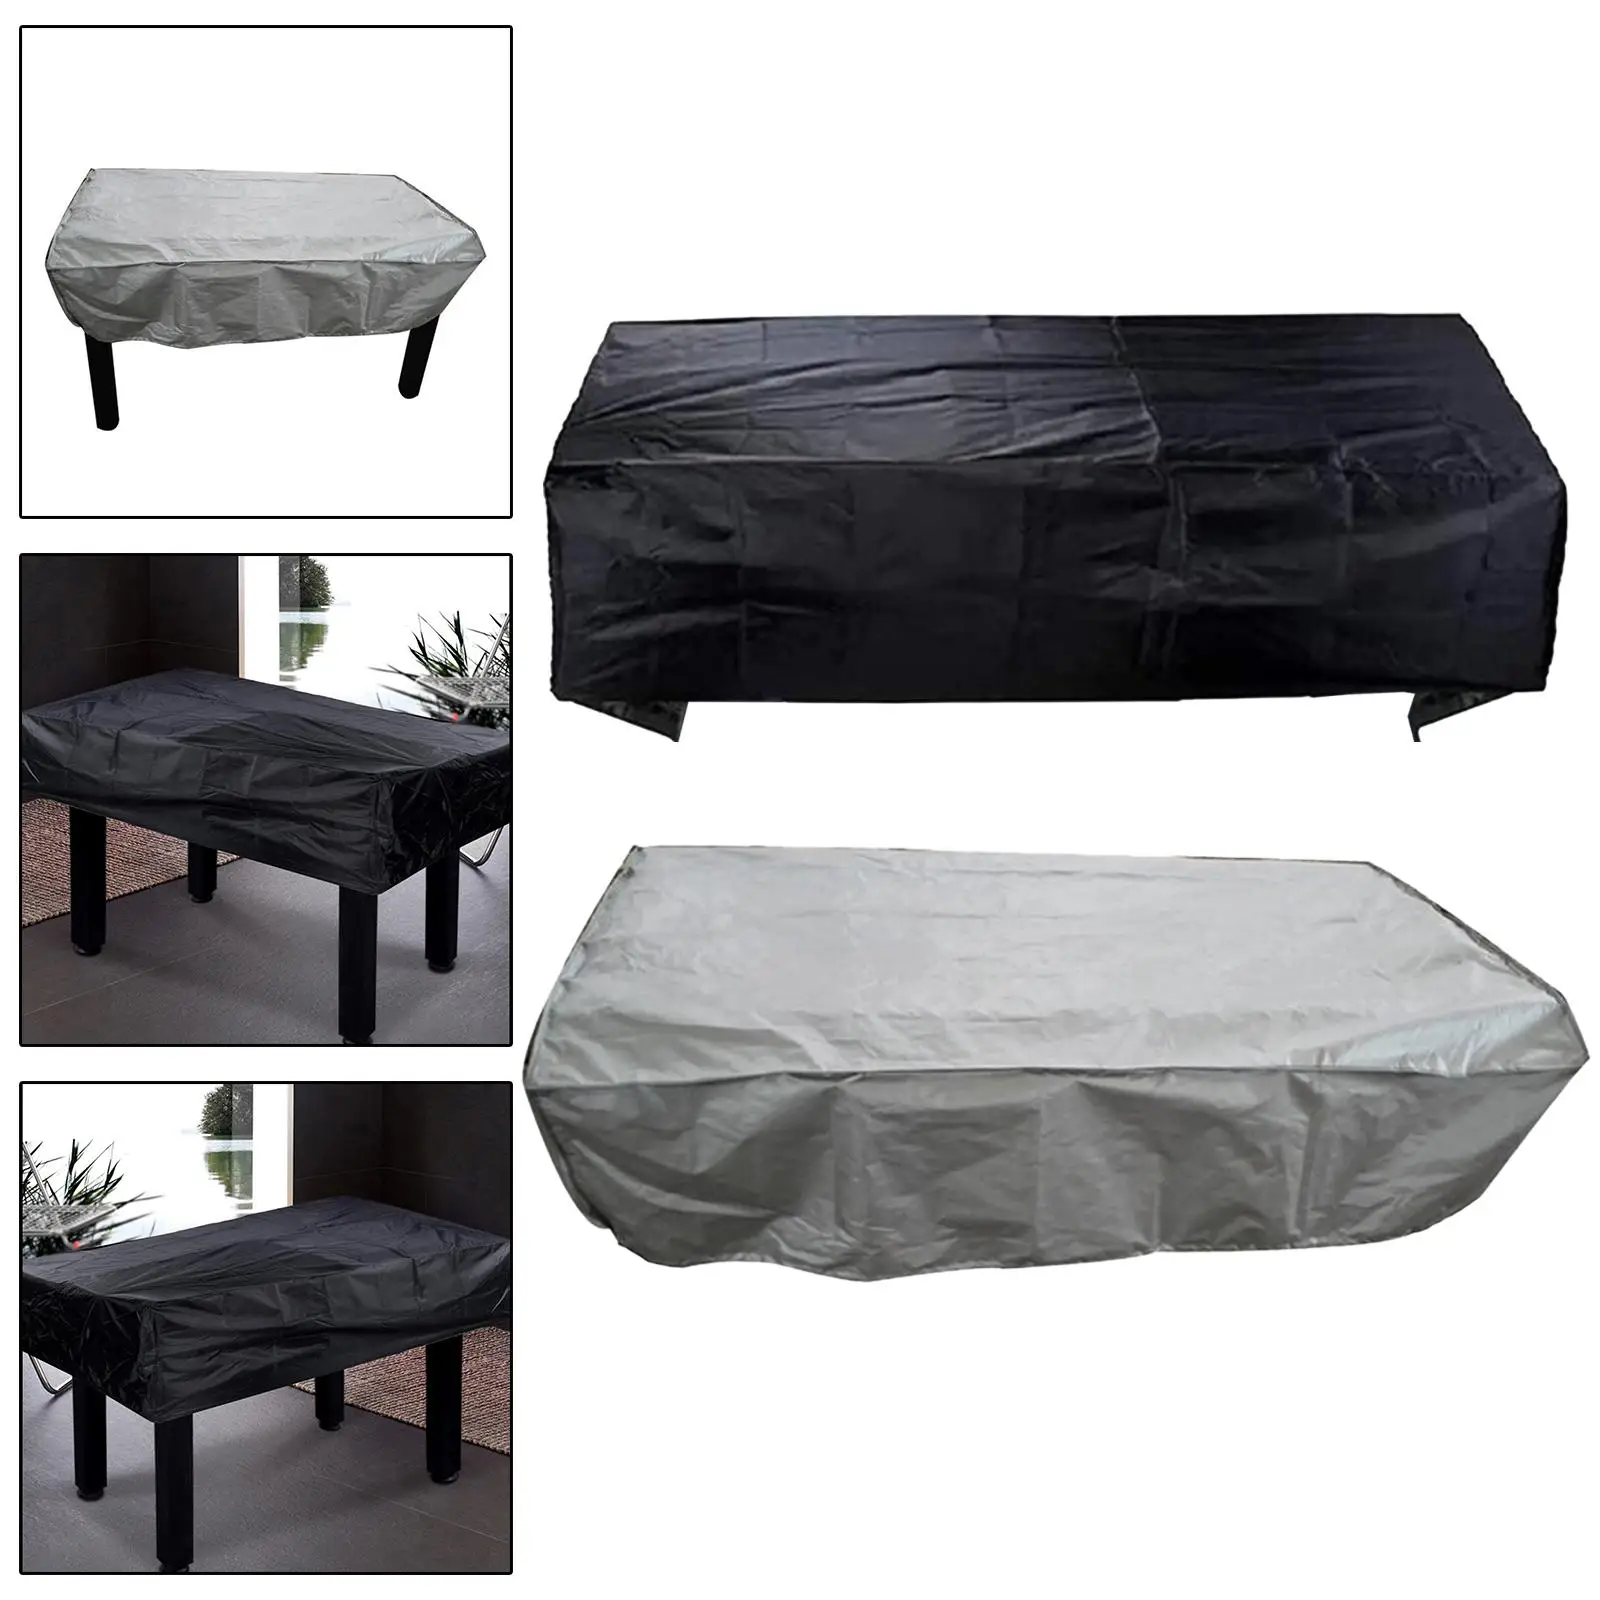 Foosball Table Cover, Waterproof Oxford Cloth Patio Coffee Chair Soccer Cover Indoor Outdoor